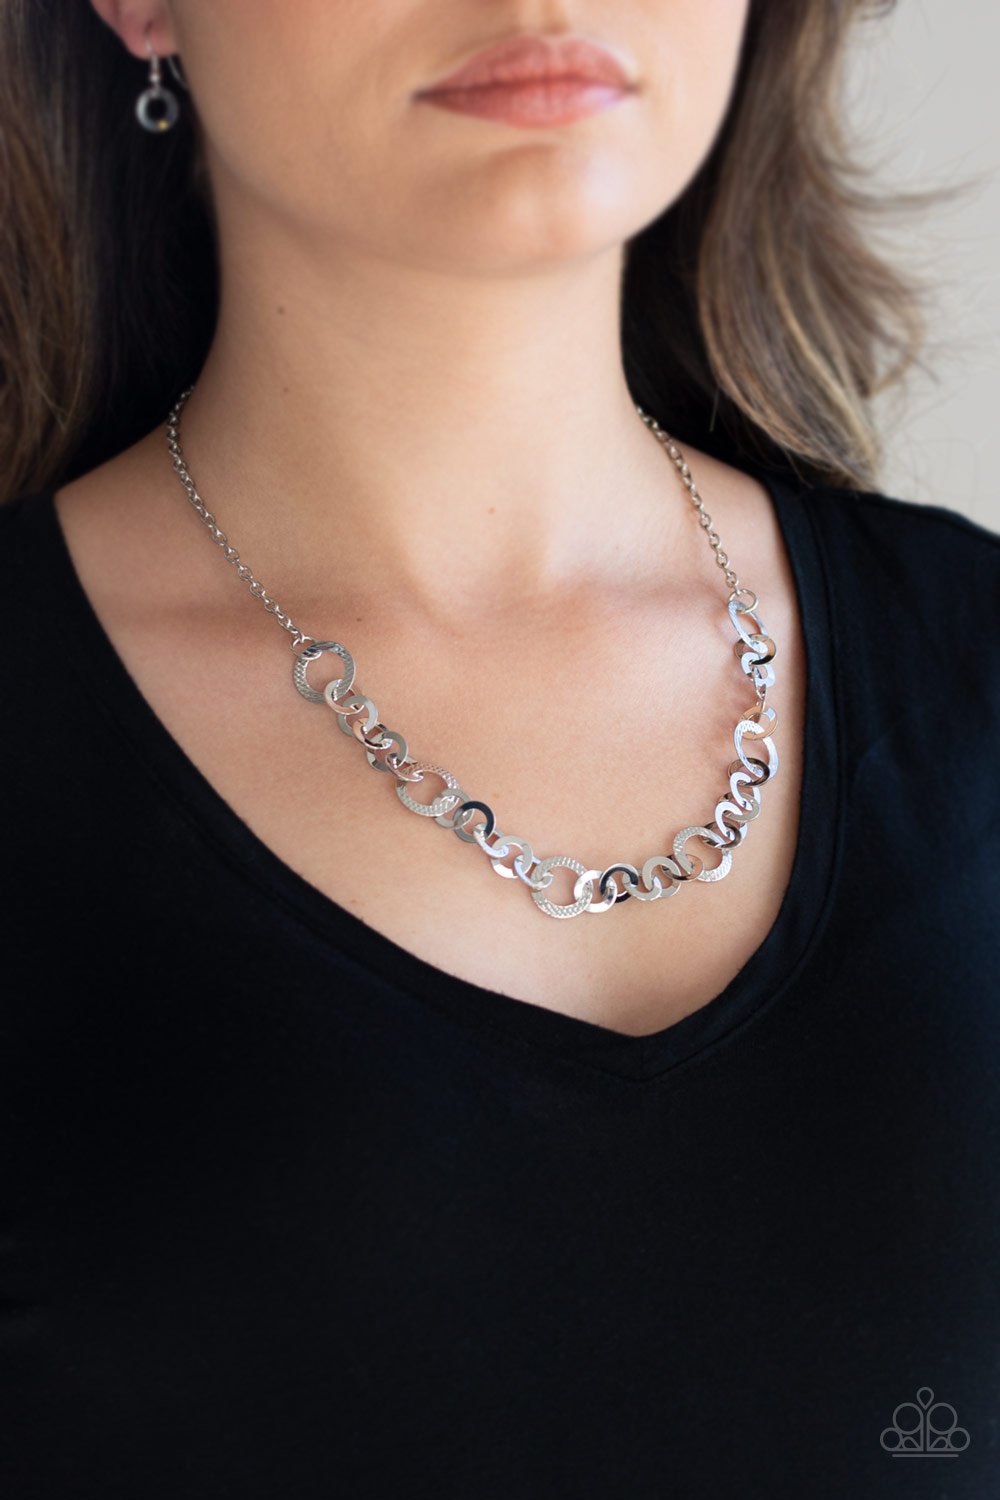 Move It On Over-silver-Paparazzi necklace